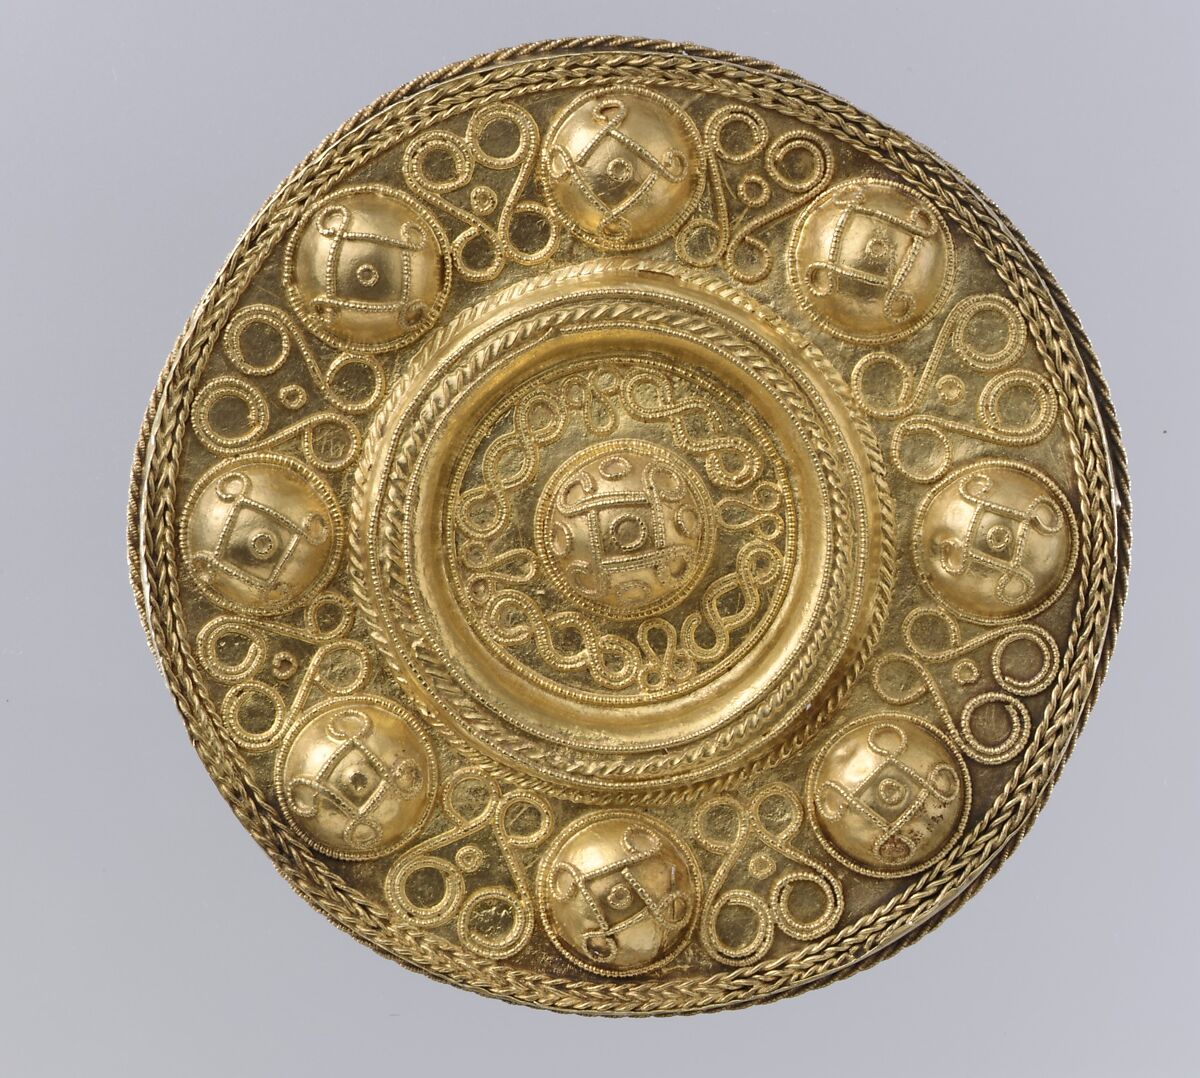 Disk Brooch, Gold, Worked in repoussé with twisted wire and filigree, Langobardic